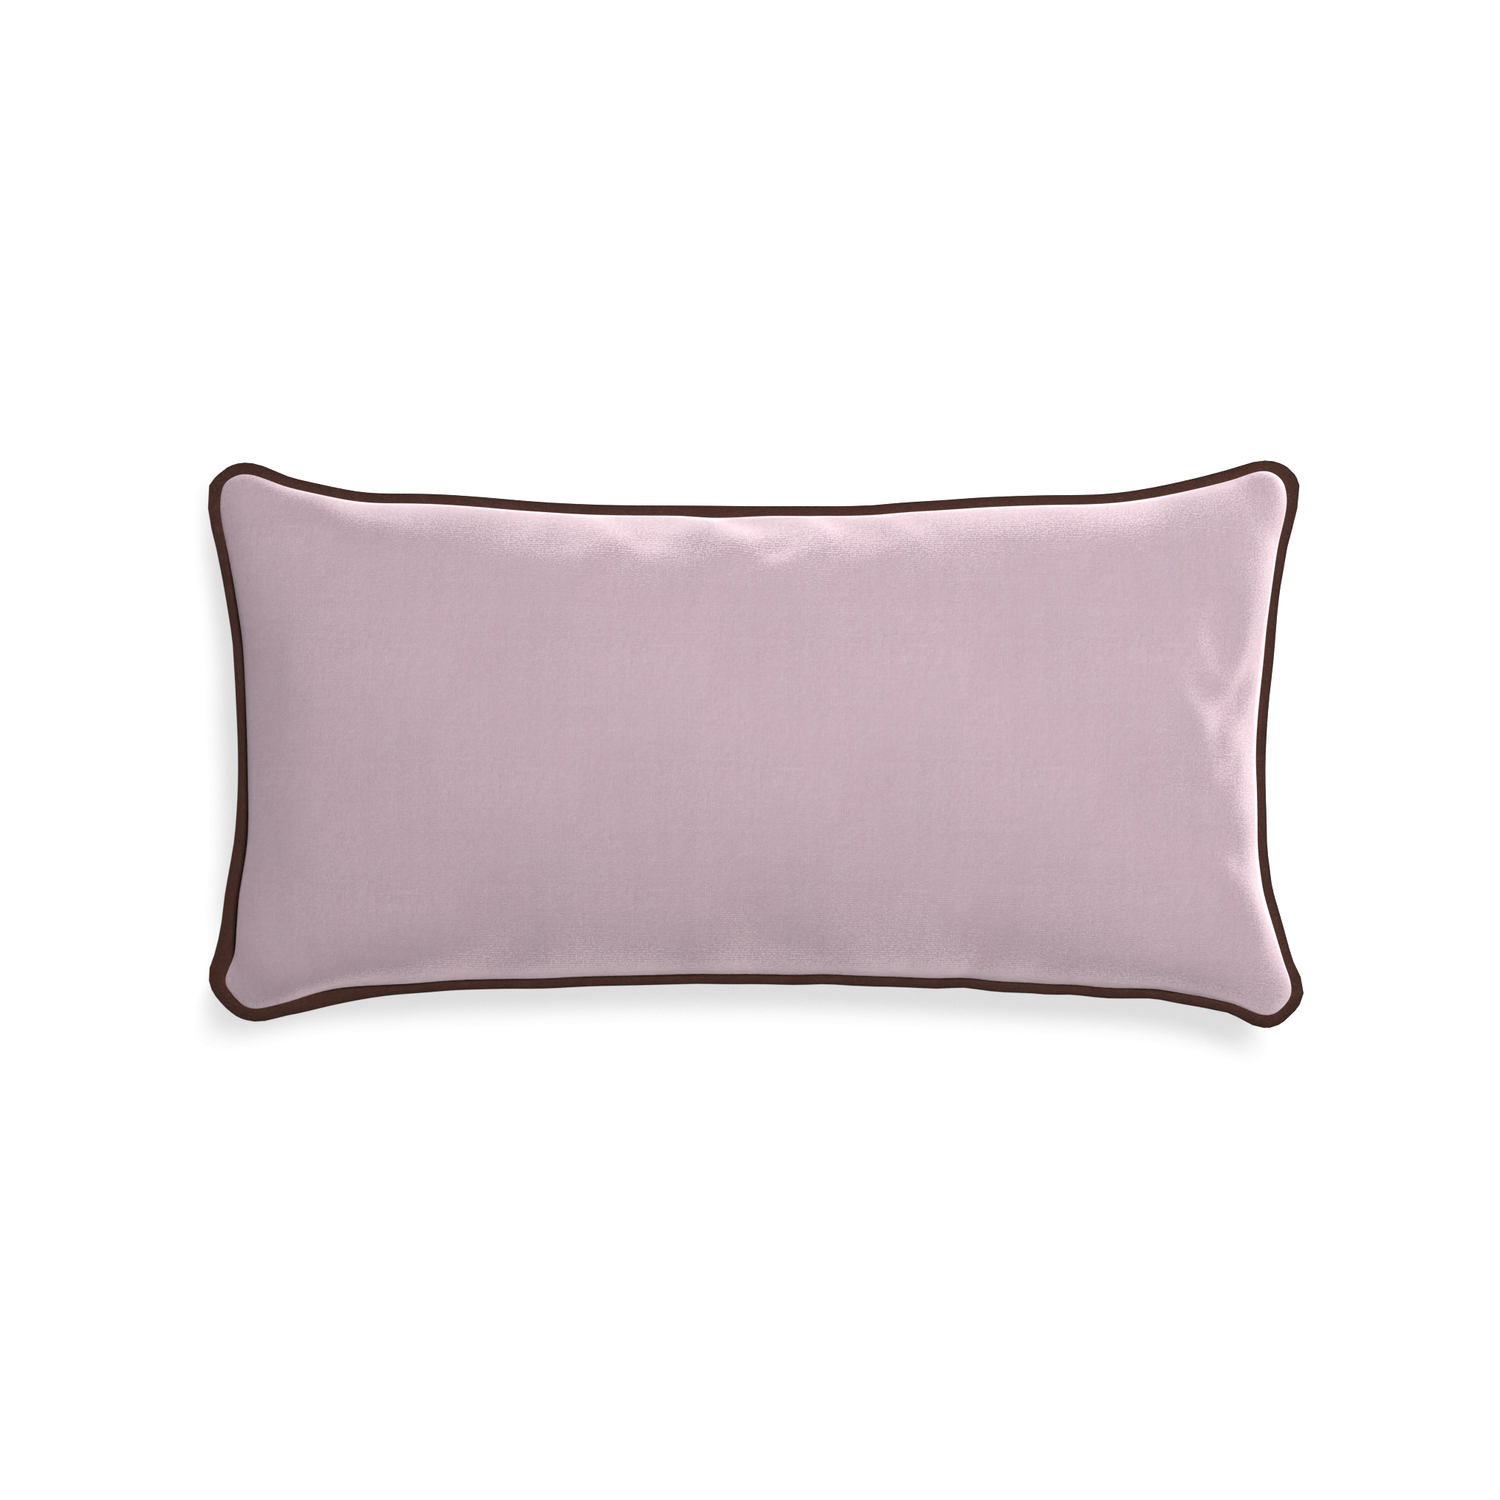 Midi-lumbar lilac velvet custom lilacpillow with w piping on white background